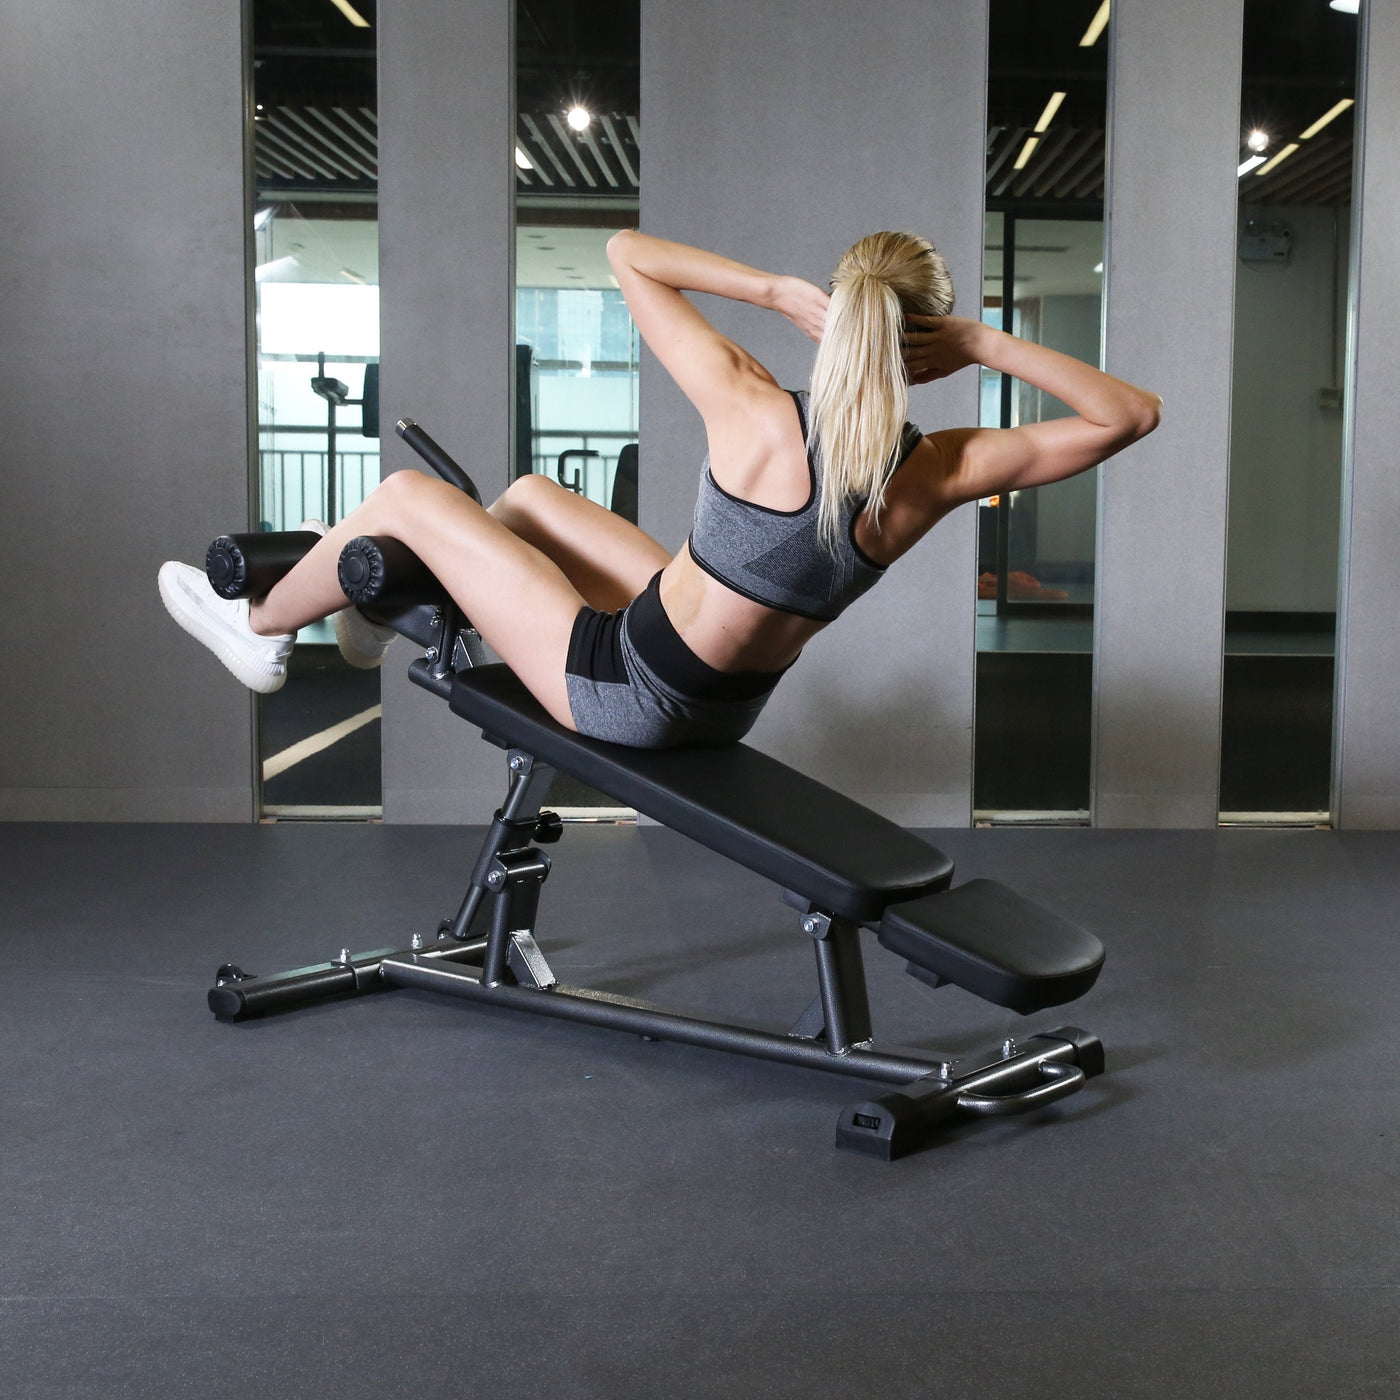 The Benefits of the Sit Up Bench